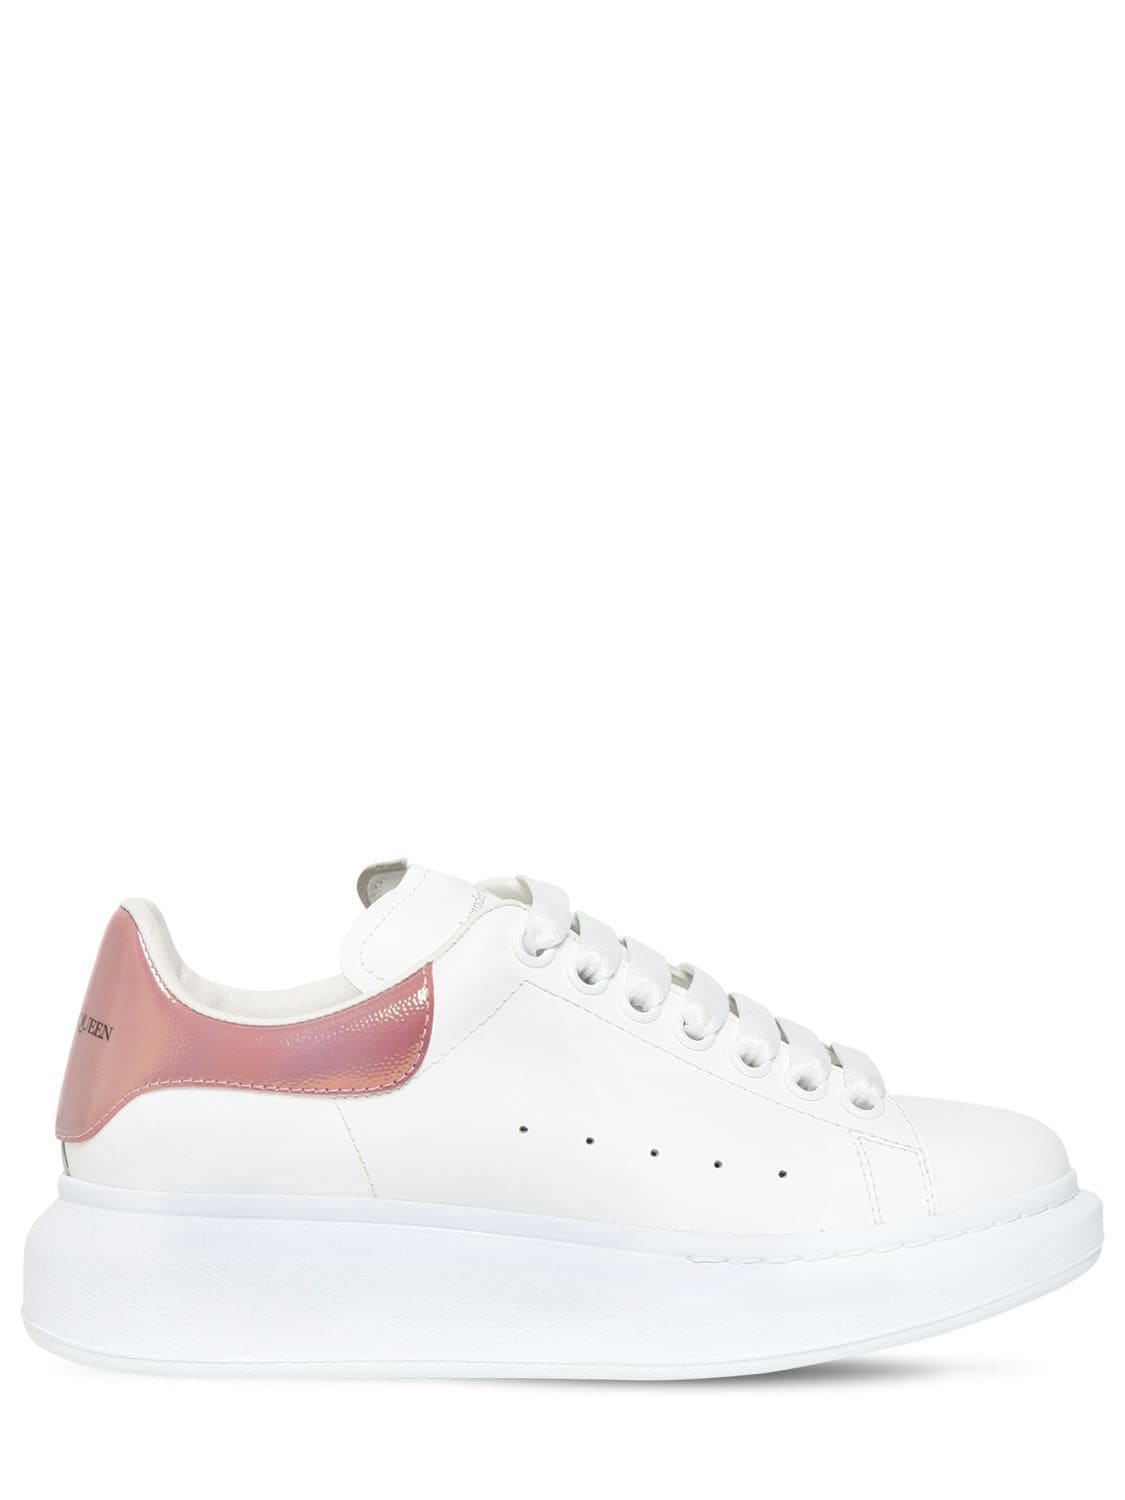 alexander mcqueen white and pink